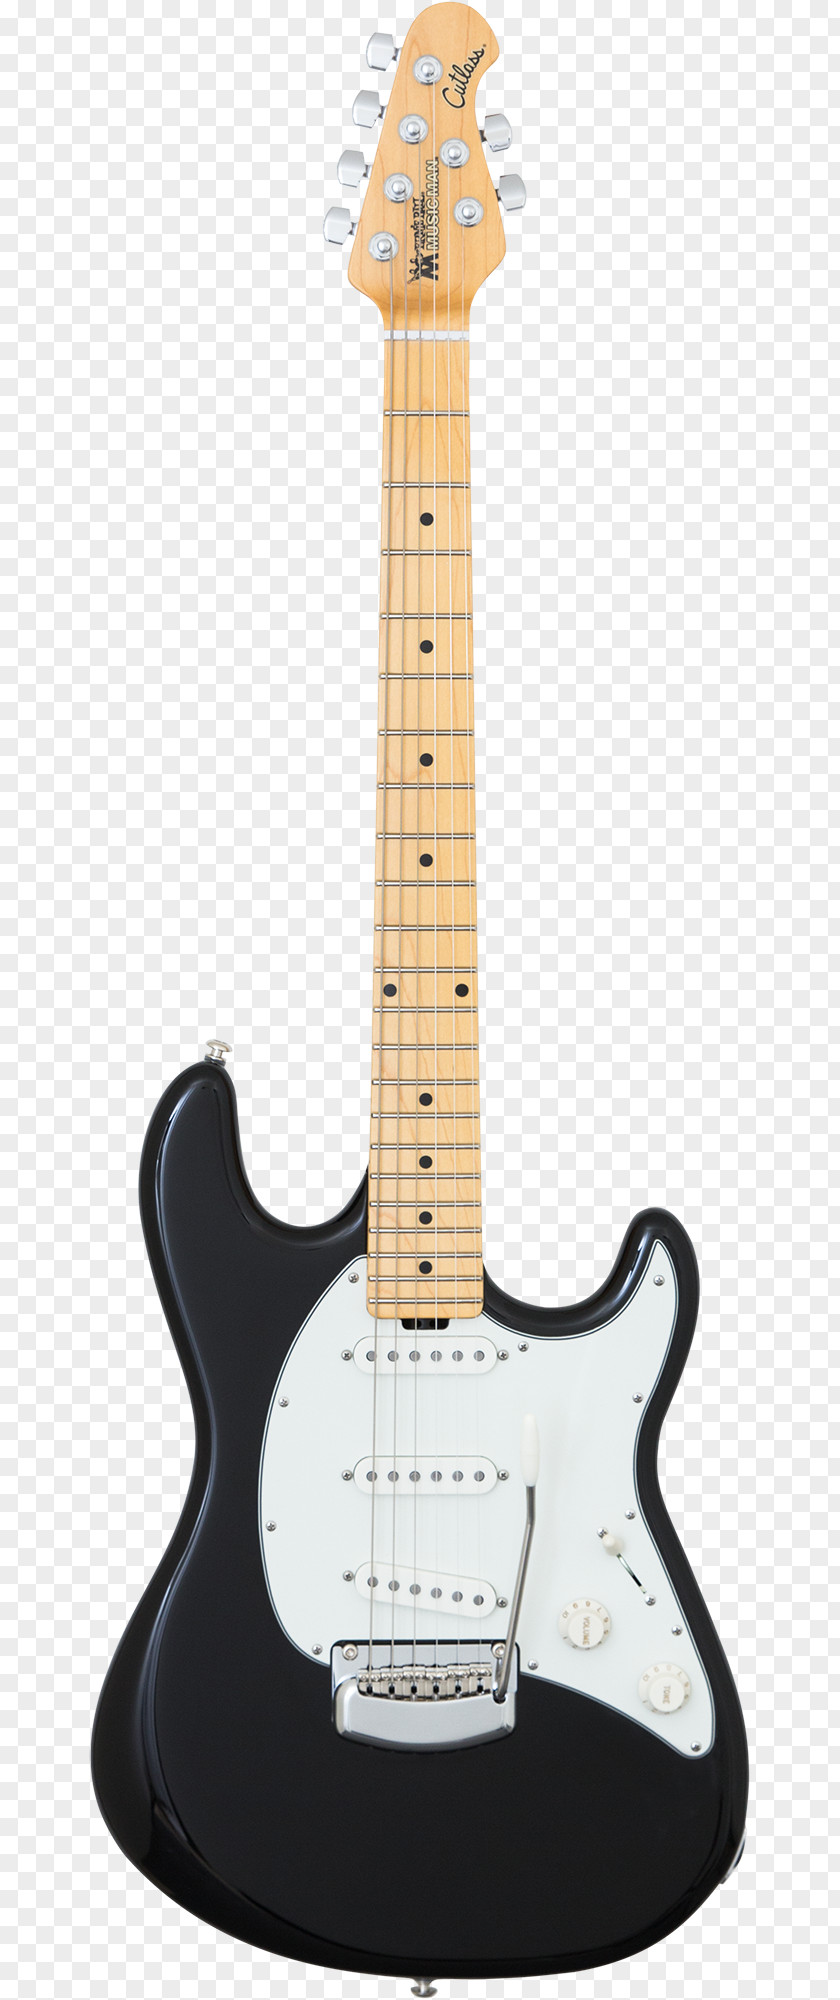 Electric Guitar Fender Stratocaster Musical Instruments Corporation American Deluxe Series Fingerboard PNG